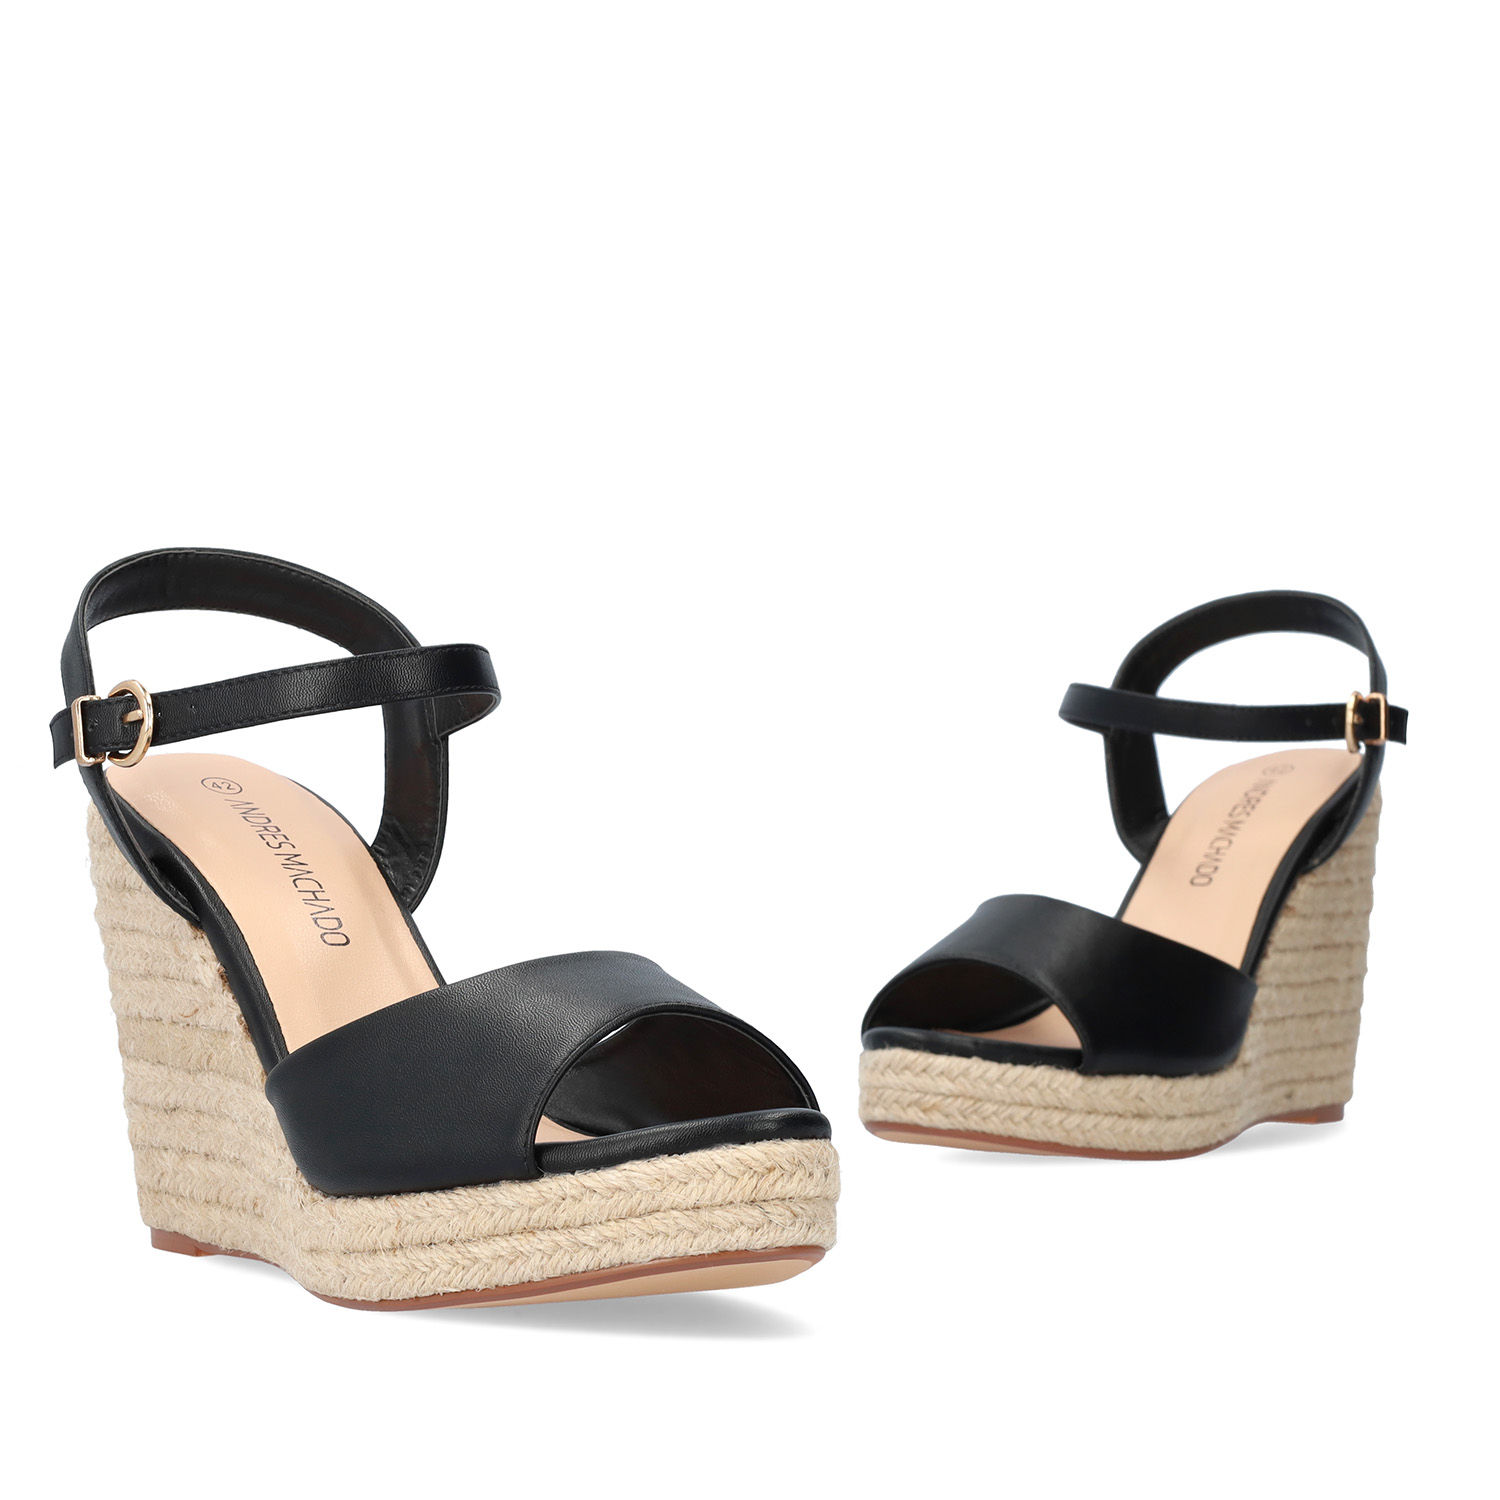 Black soft fabric sandal with a jute wedge 